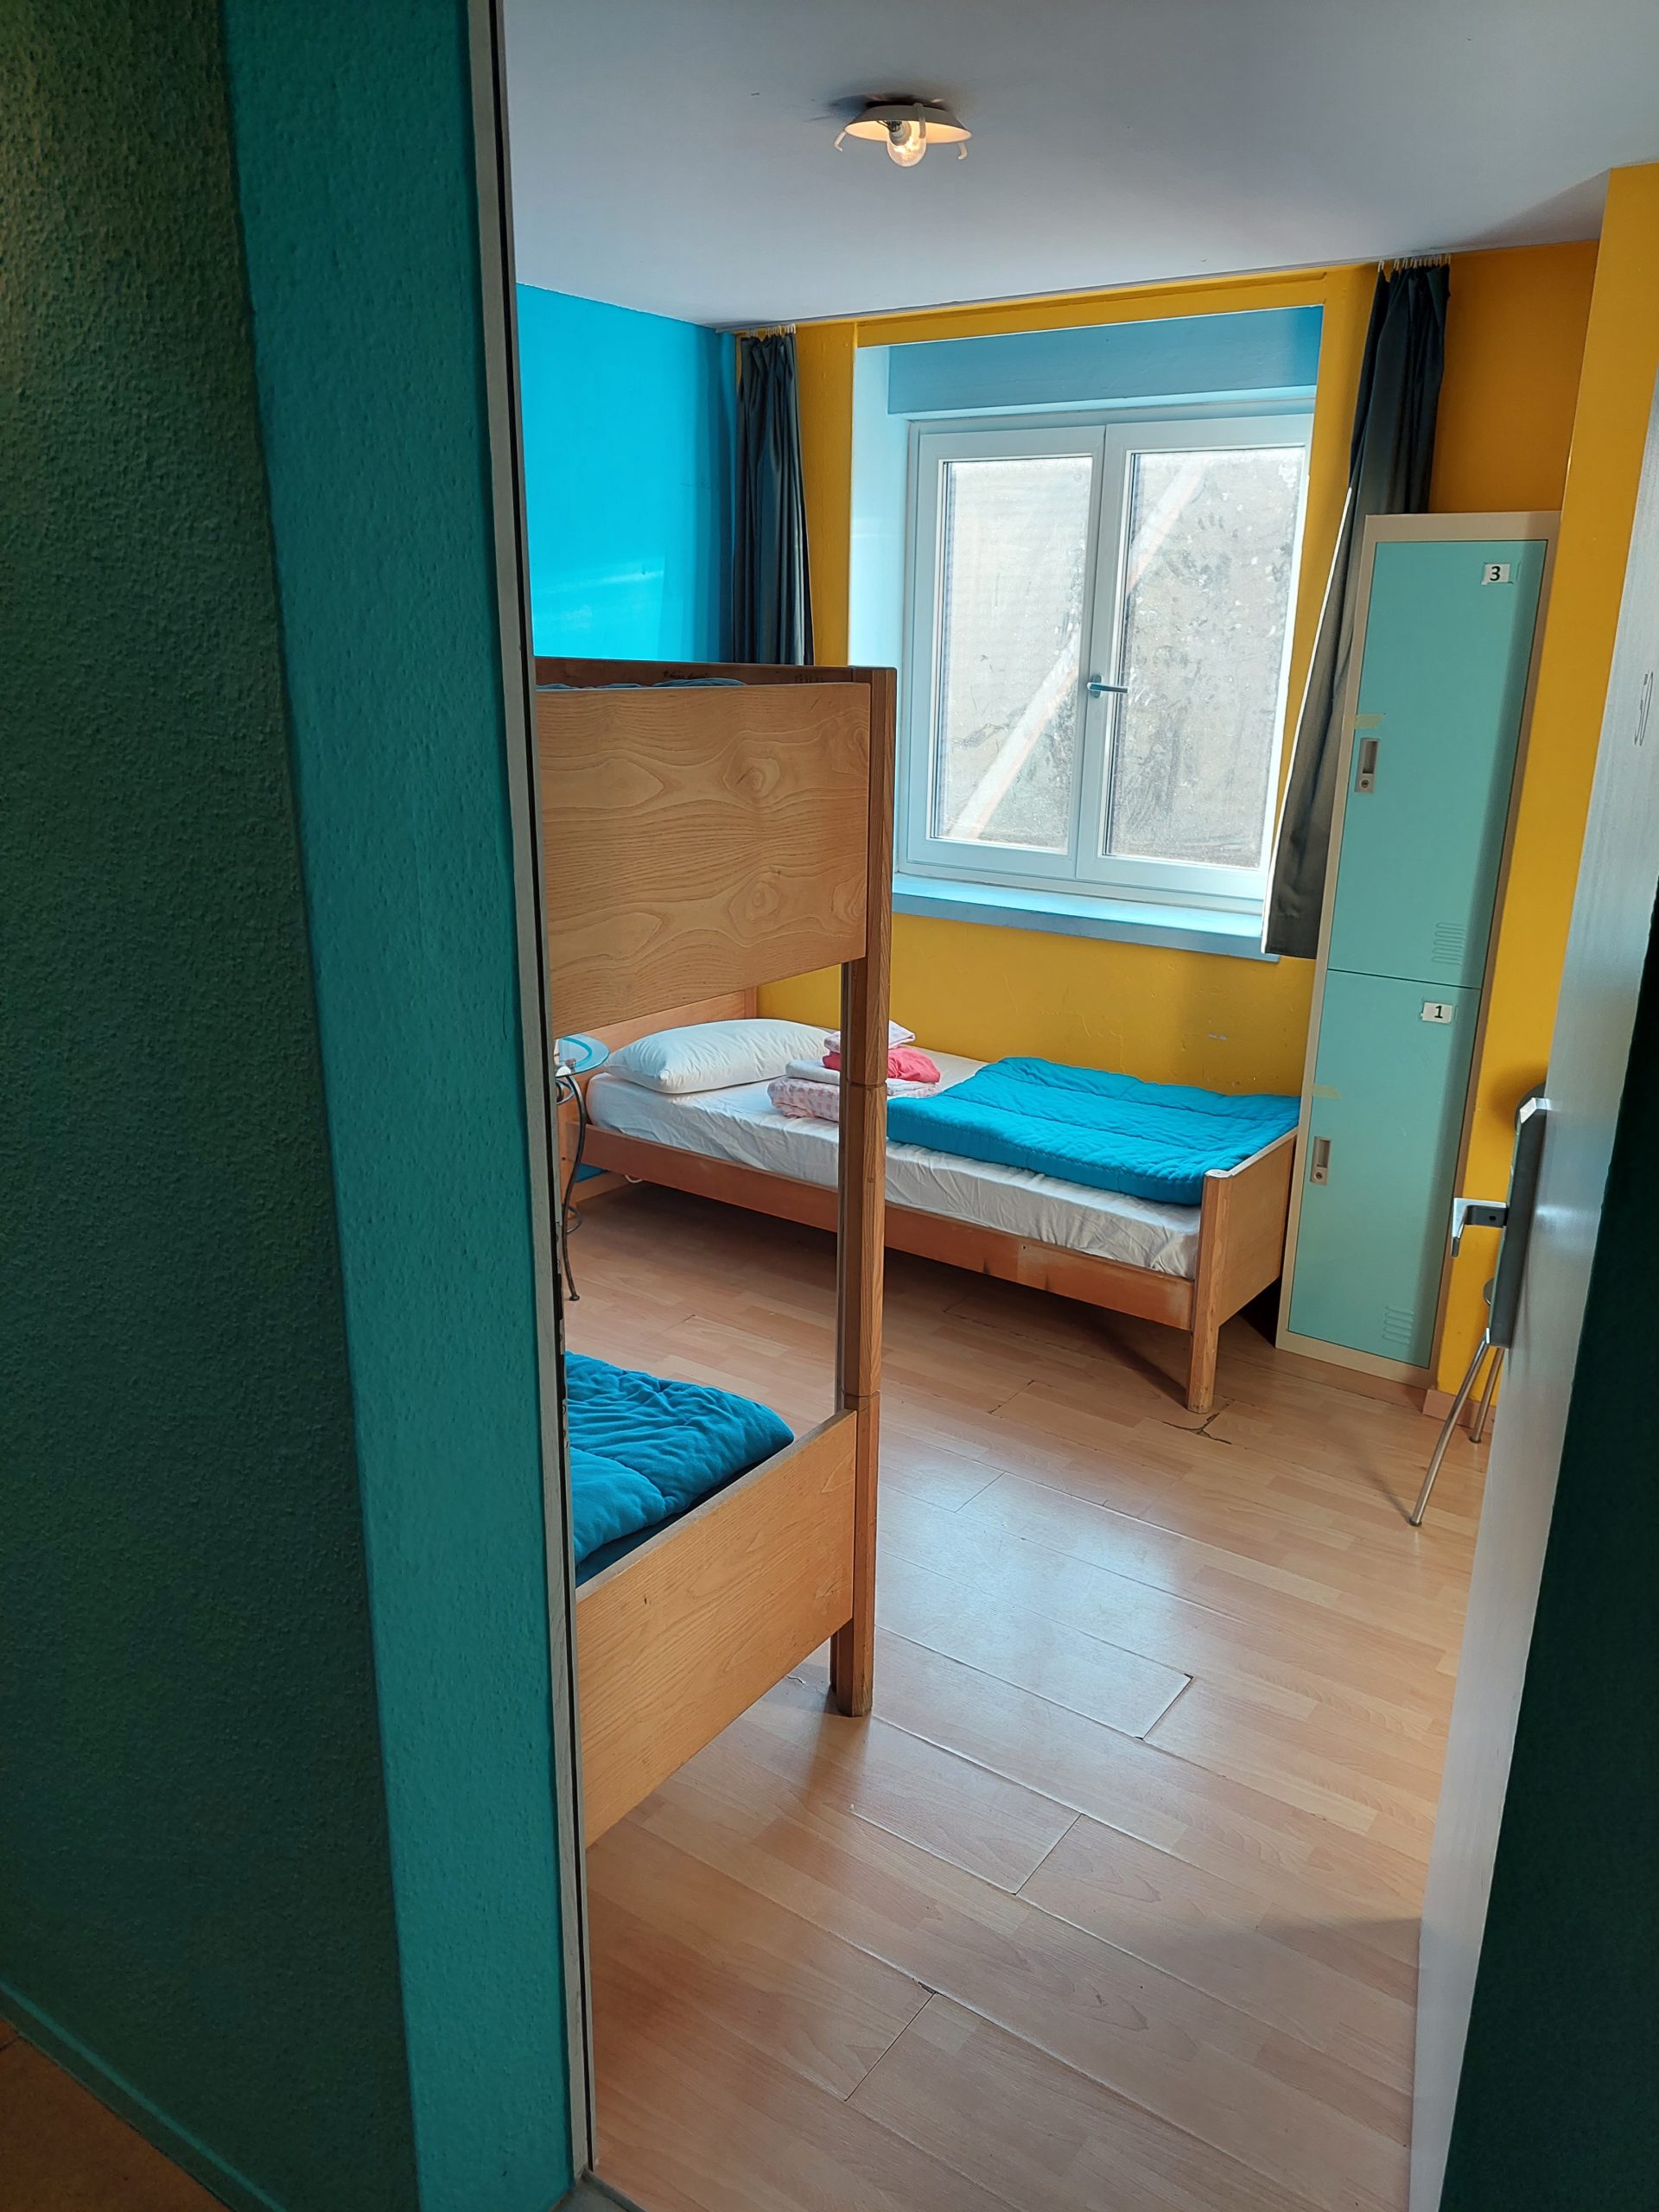 3-bed female 40/50